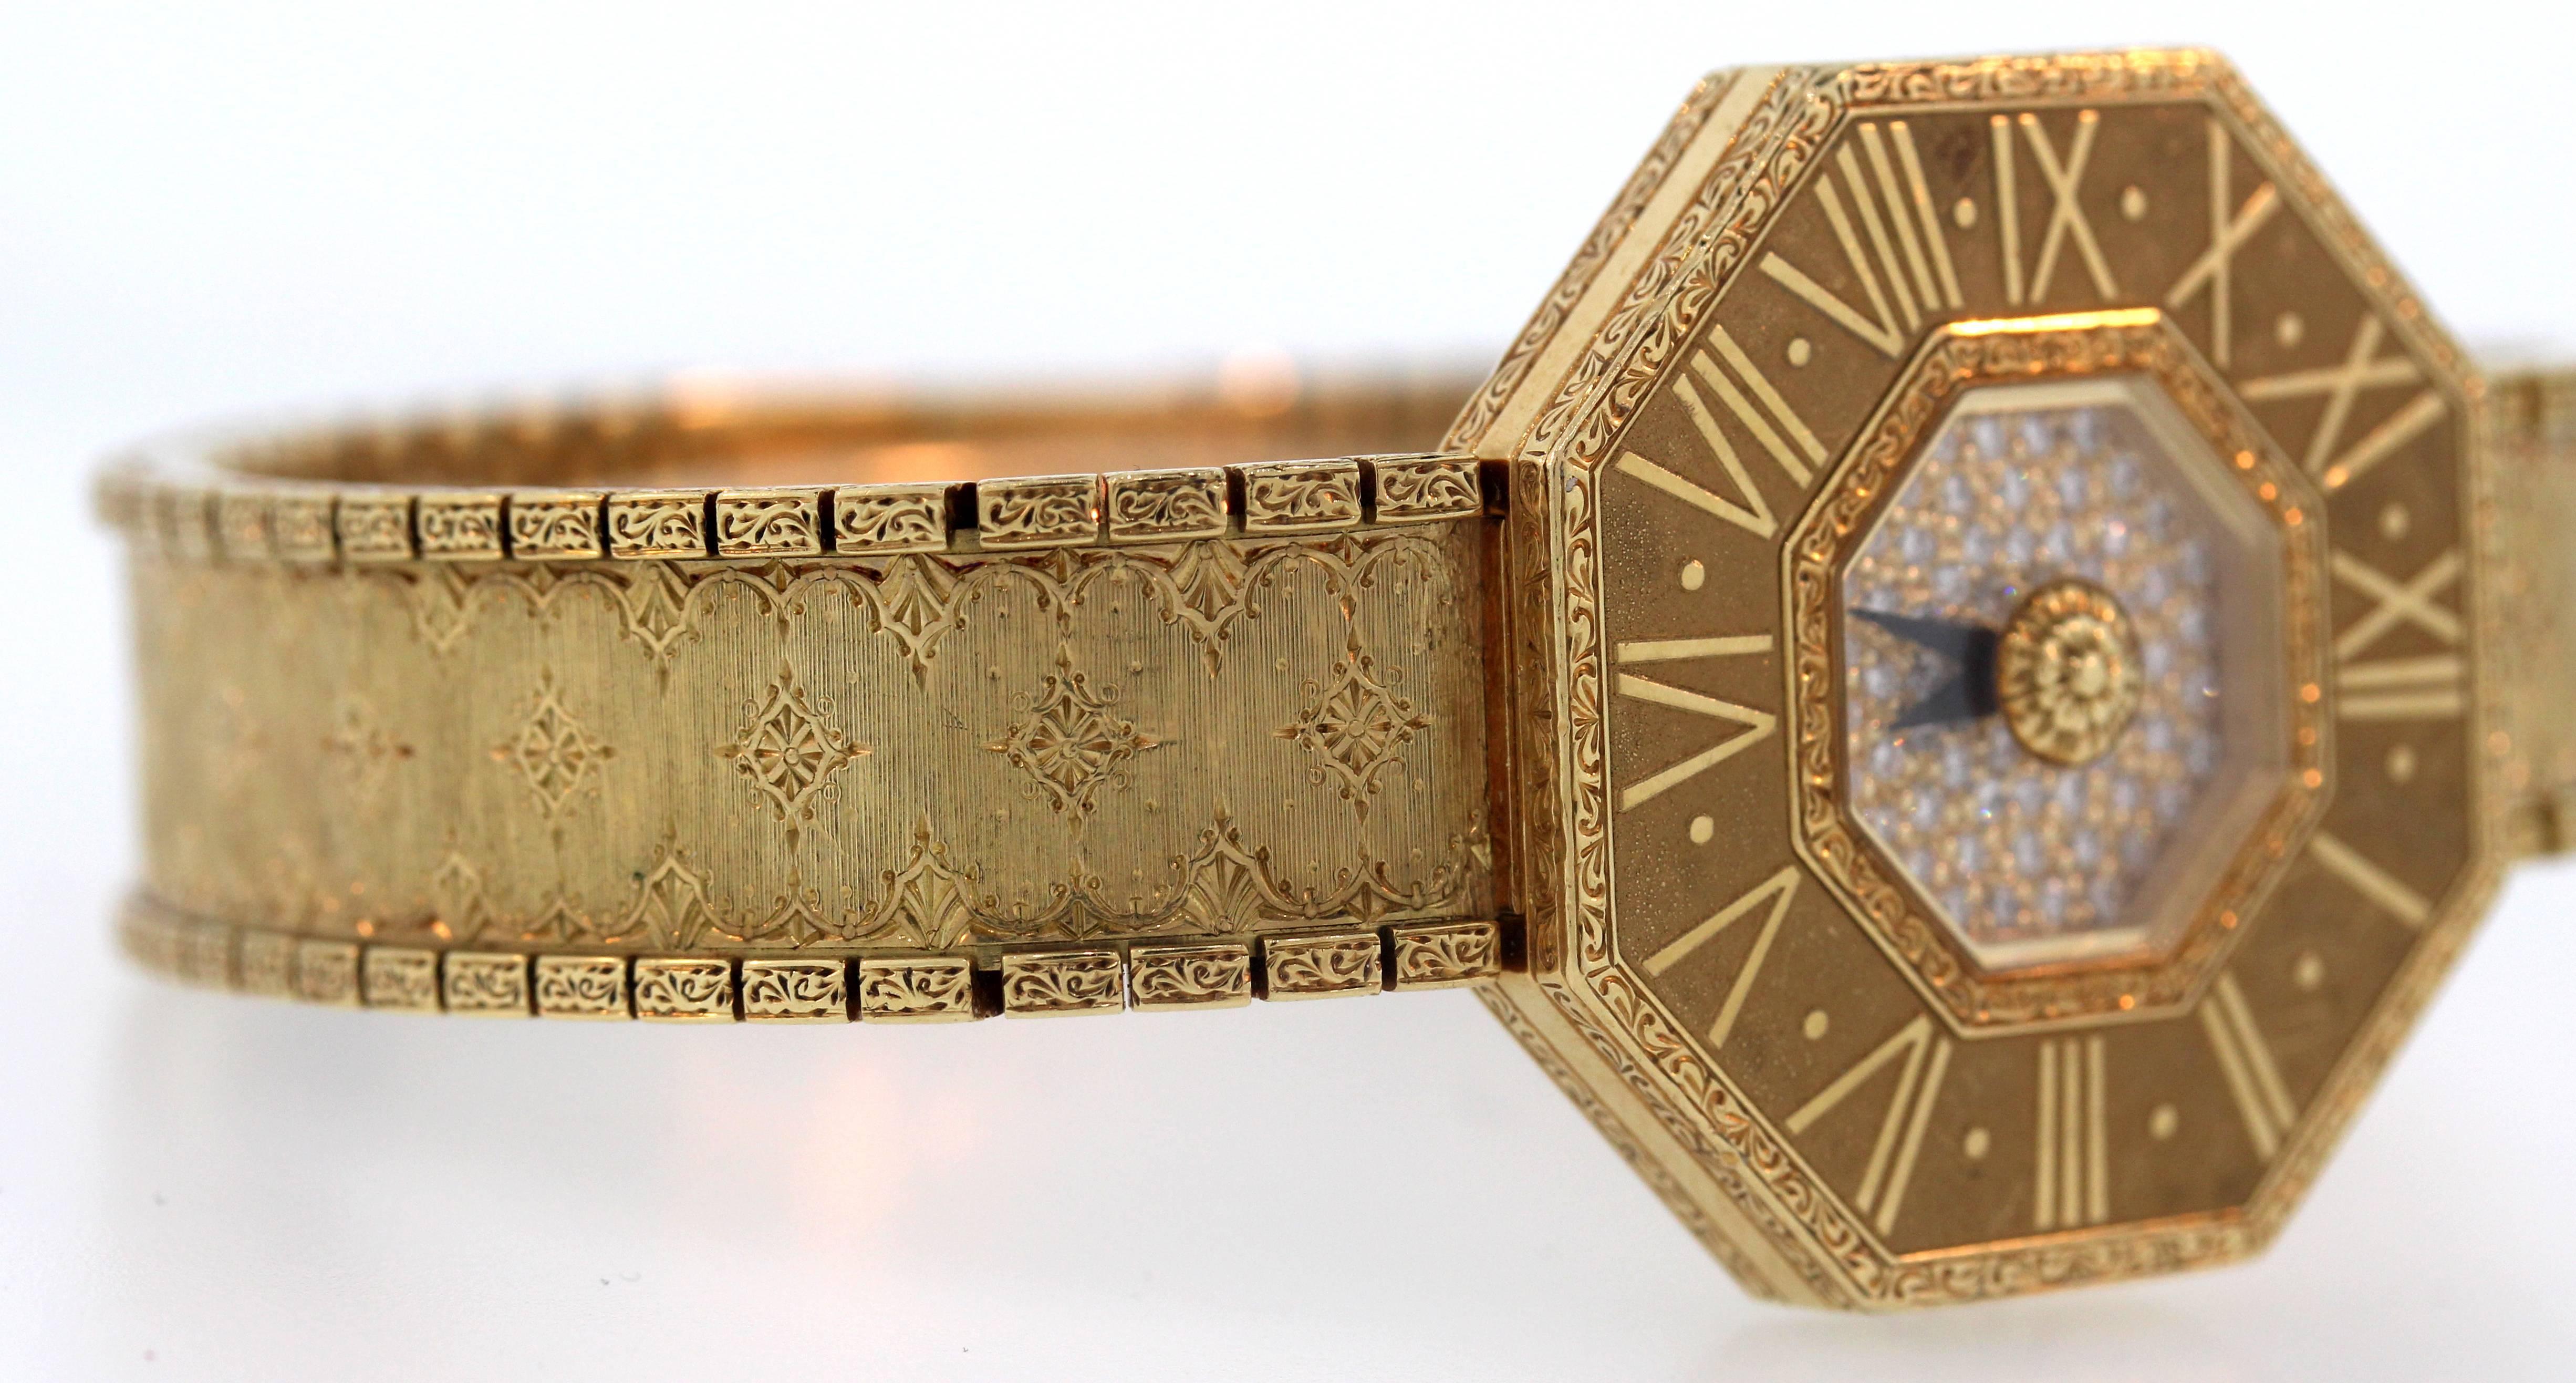 18K Gold Buccellati Oktachron Ladies Yellow Gold and Diamond Wristwatch

This watch from Buccellati is called the "Oktachron". Brushed yellow gold finish on watch band, hand engraved.

Watch face is apprx. 26mm with diamonds set, F-G